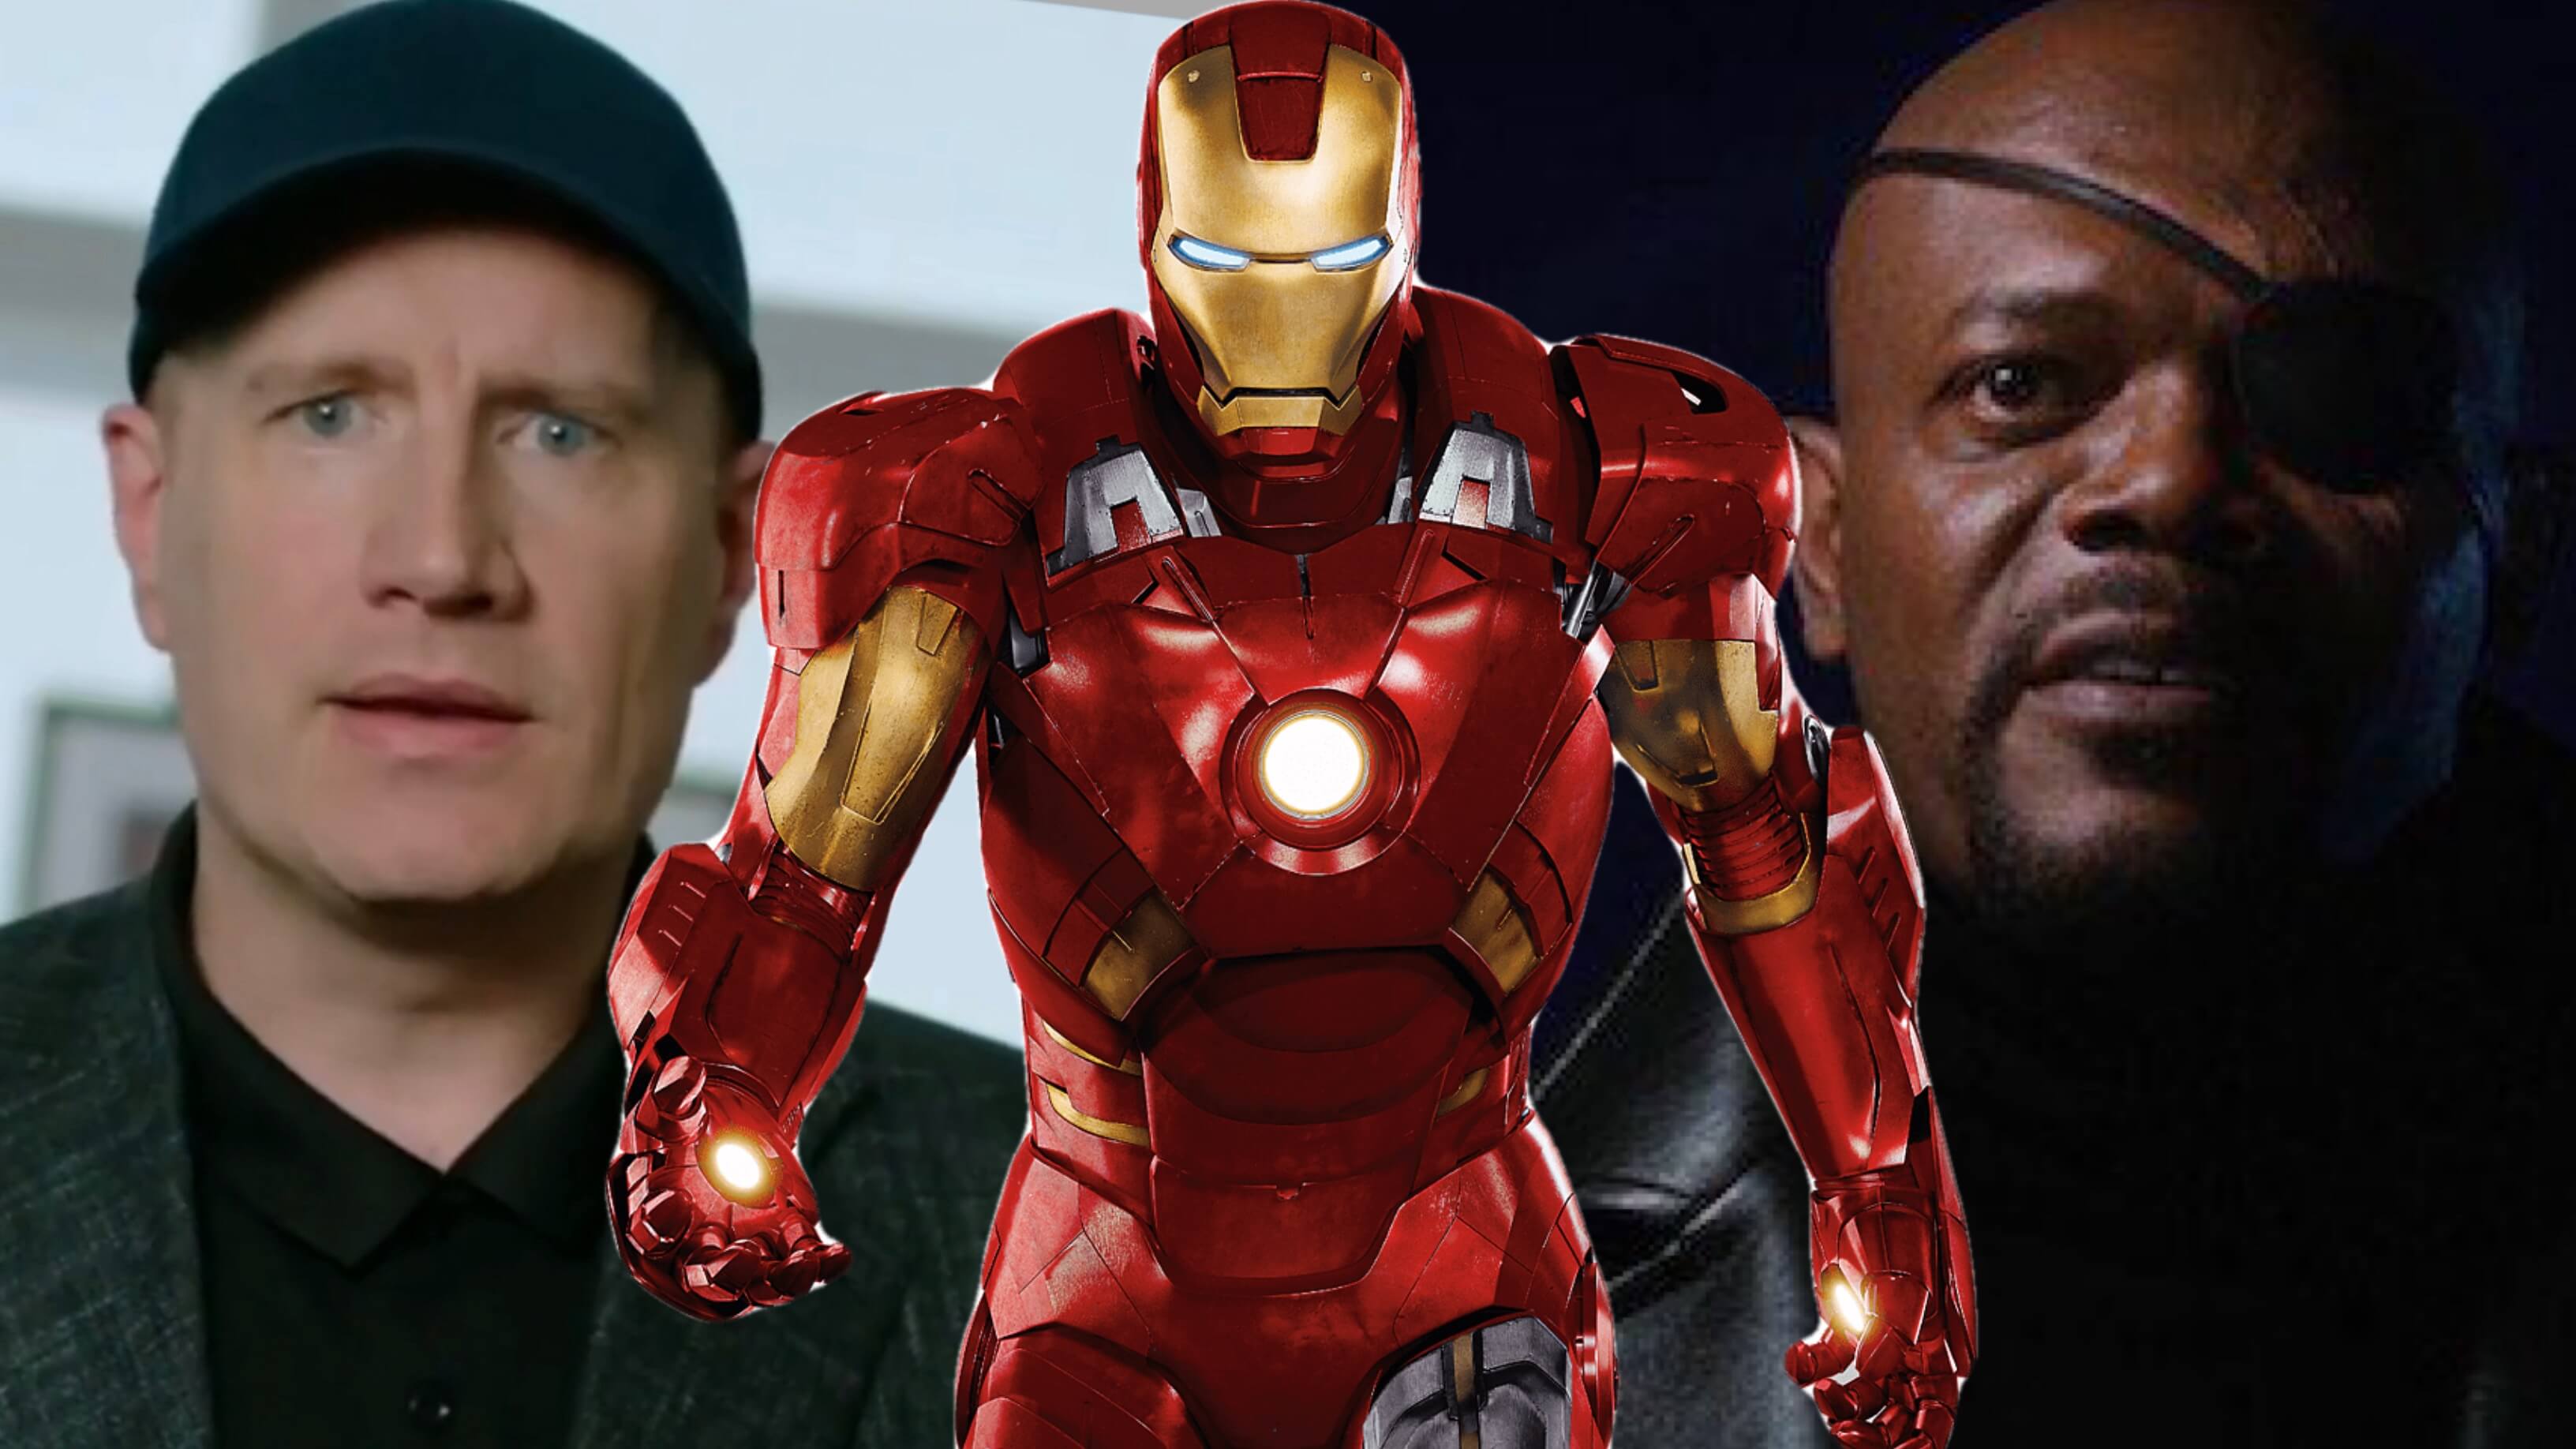 Kevin Feige Debuts Never Before Seen ’Iron Man’ Deleted Scene That Teased Mutants and Spider-Man